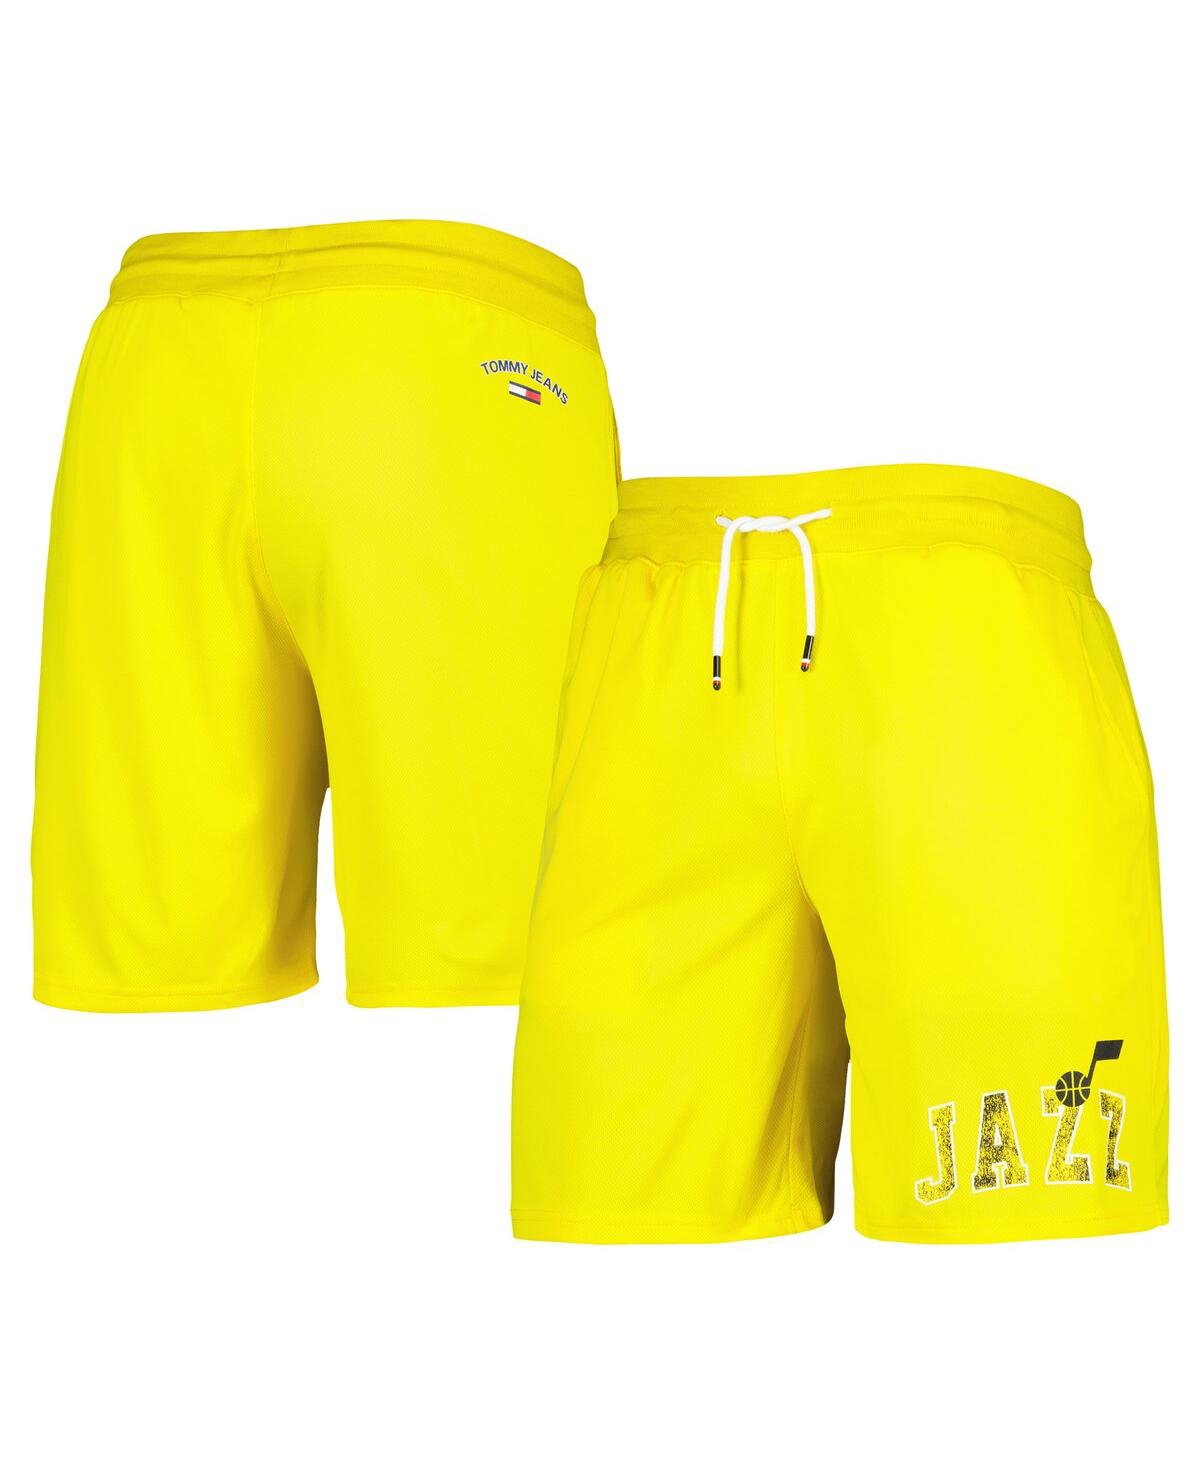 TOMMY JEANS MEN'S TOMMY JEANS YELLOW UTAH JAZZ MIKE MESH BASKETBALL SHORTS